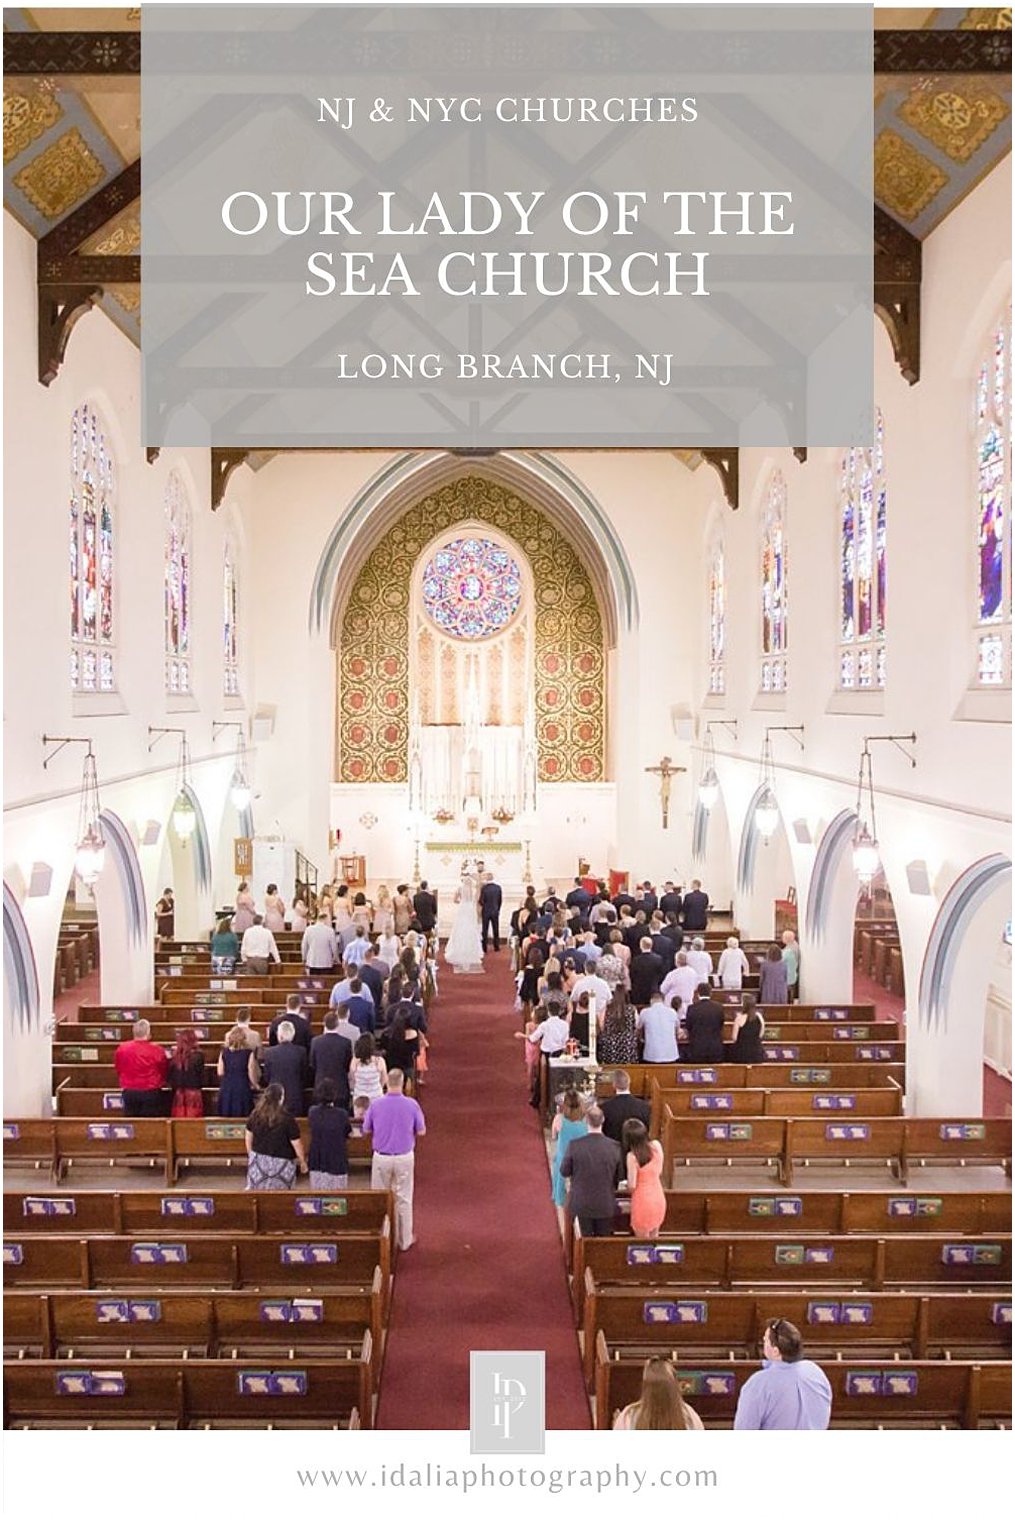 Wedding ceremony at Our lady by the sea church in Long Branch, NJ